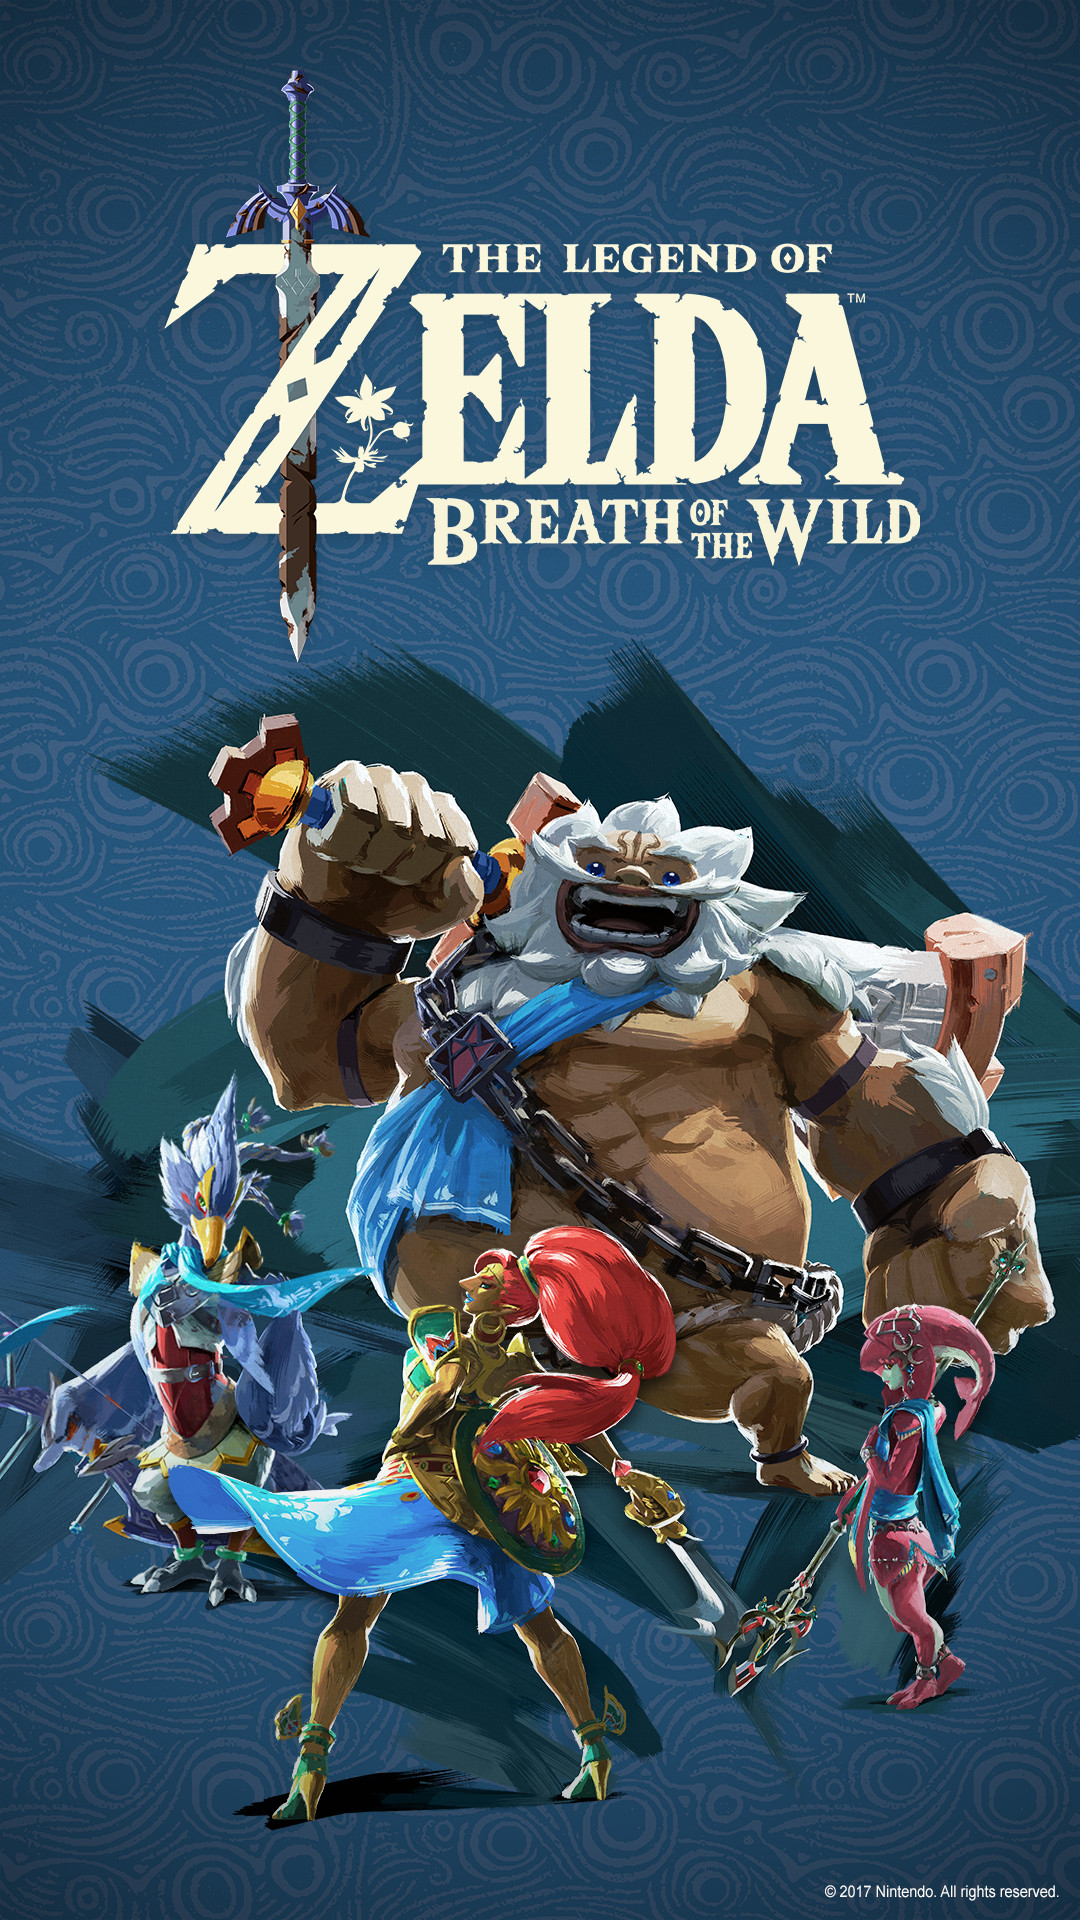 The Legend of Zelda Breath of the Wild for the Nintendo Switch 1080x1920